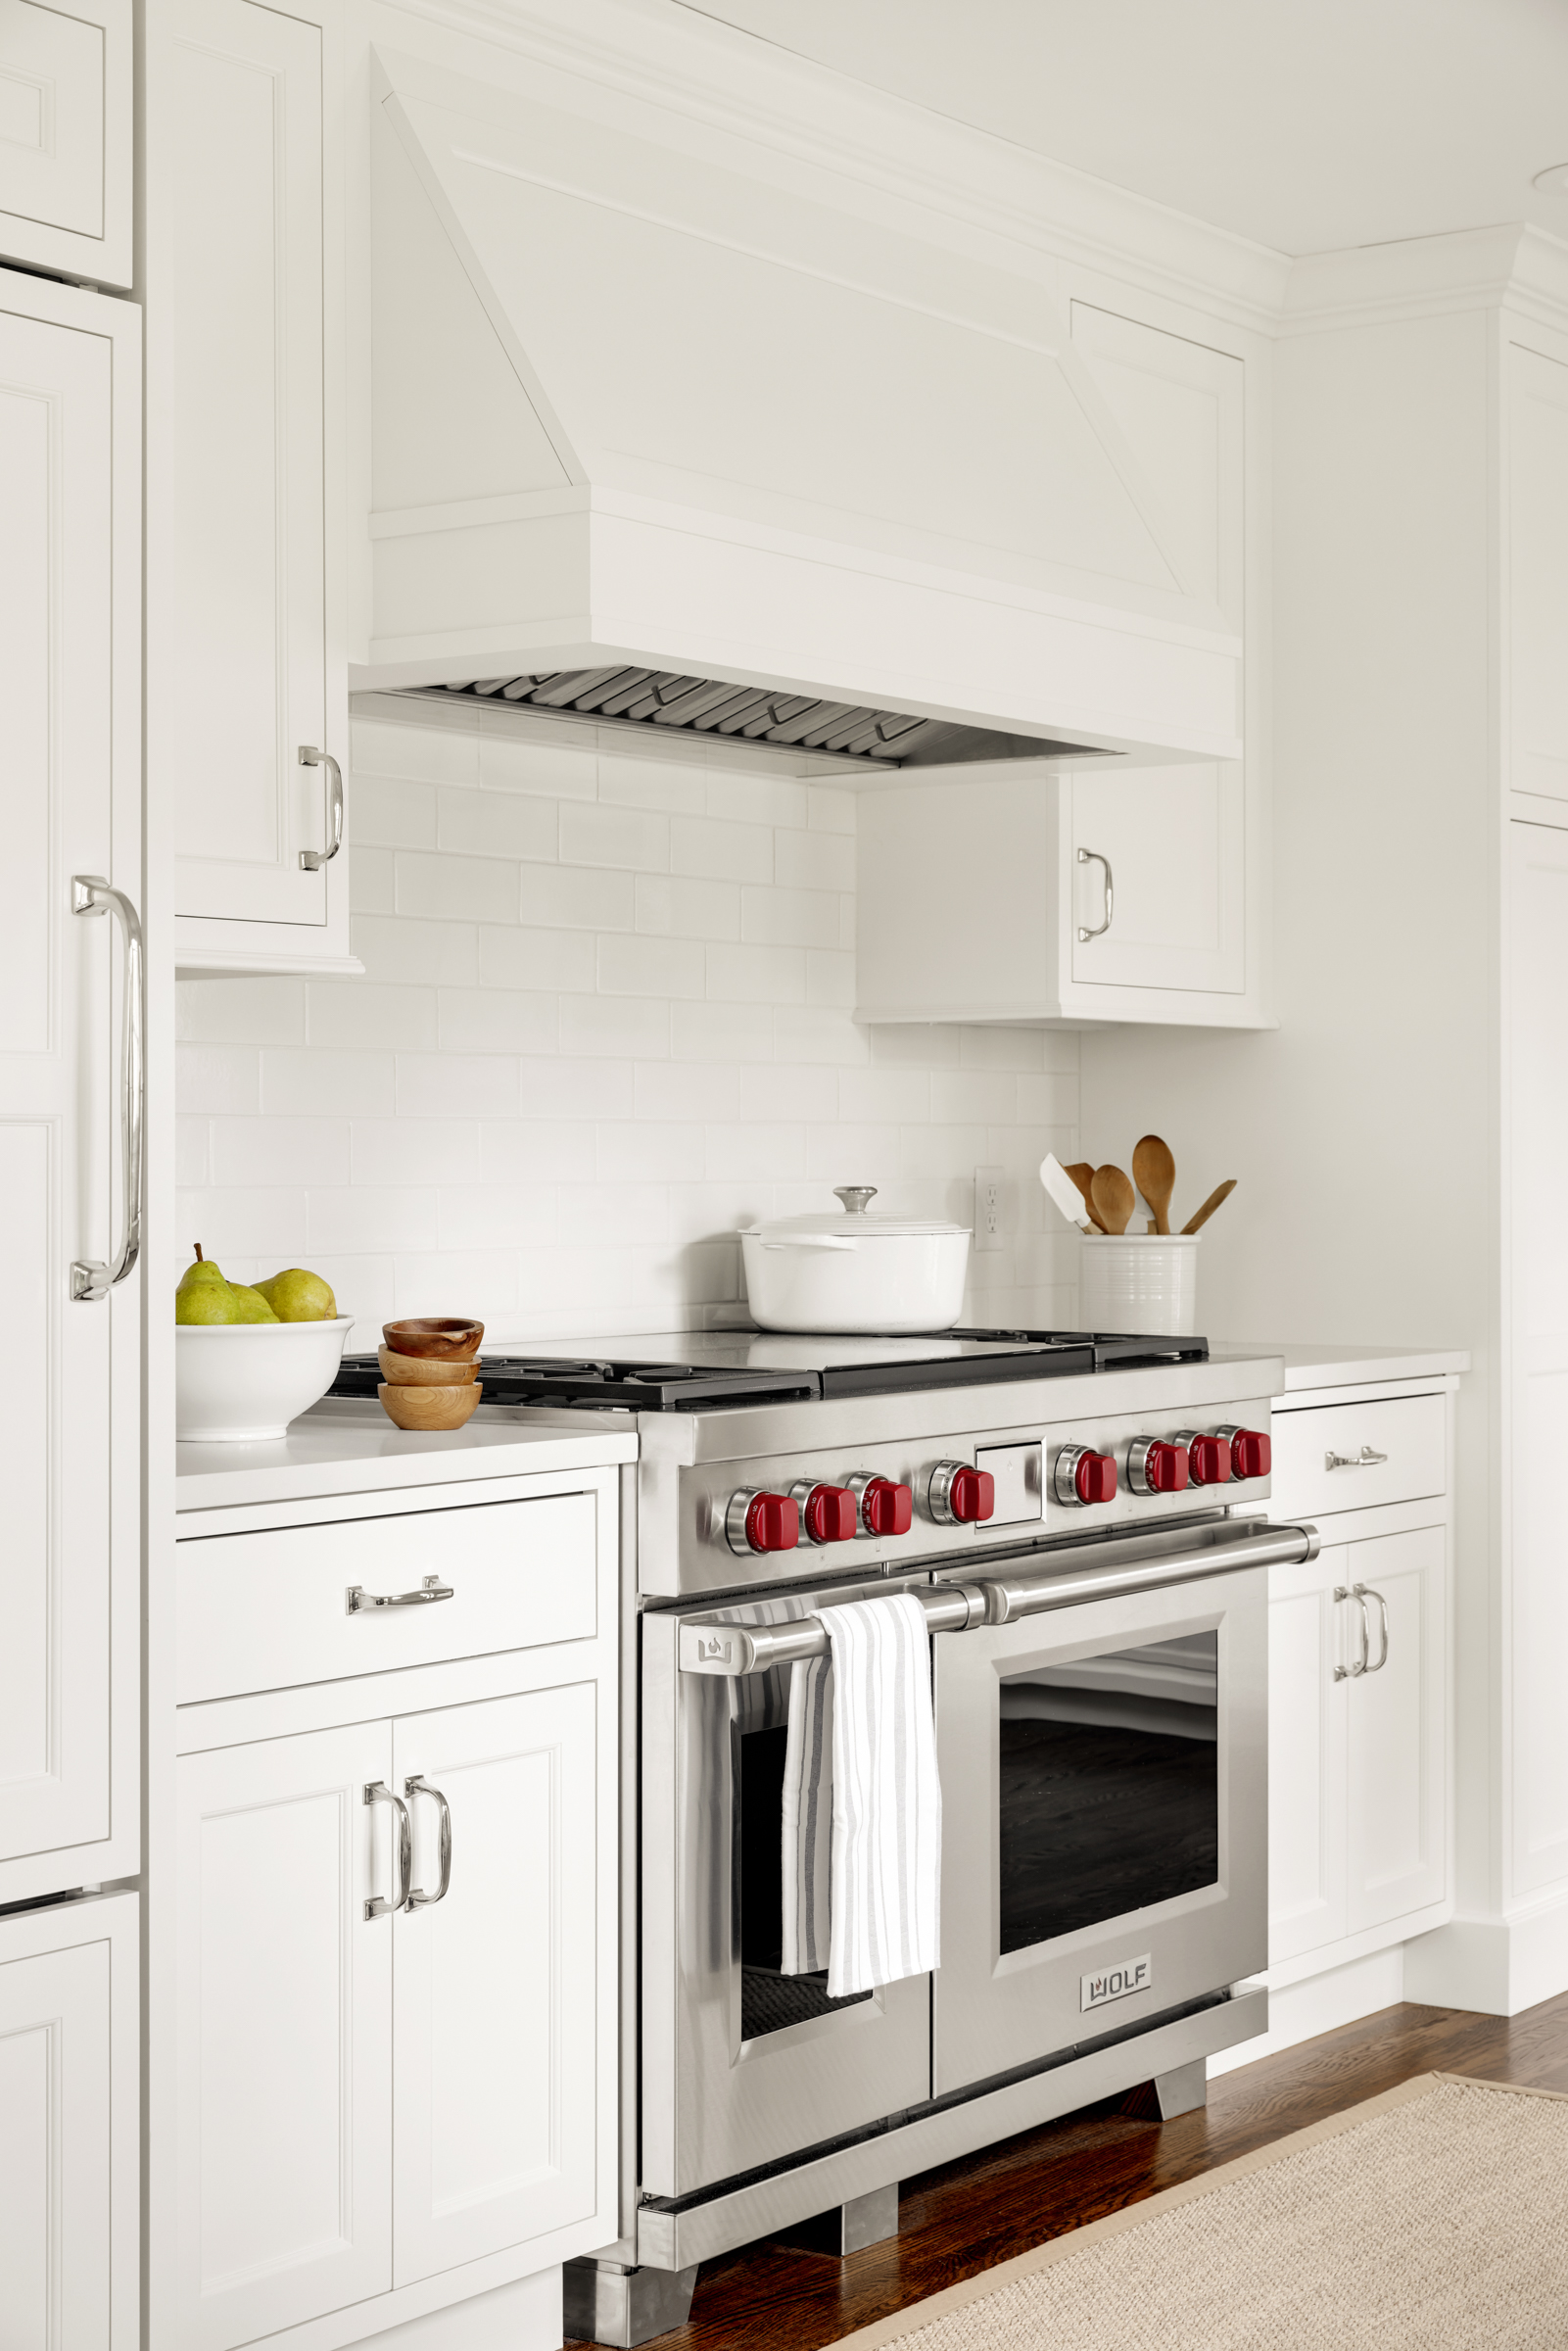 Charming kitchen remodel with white cabinets, white range hood, and high-end appliances